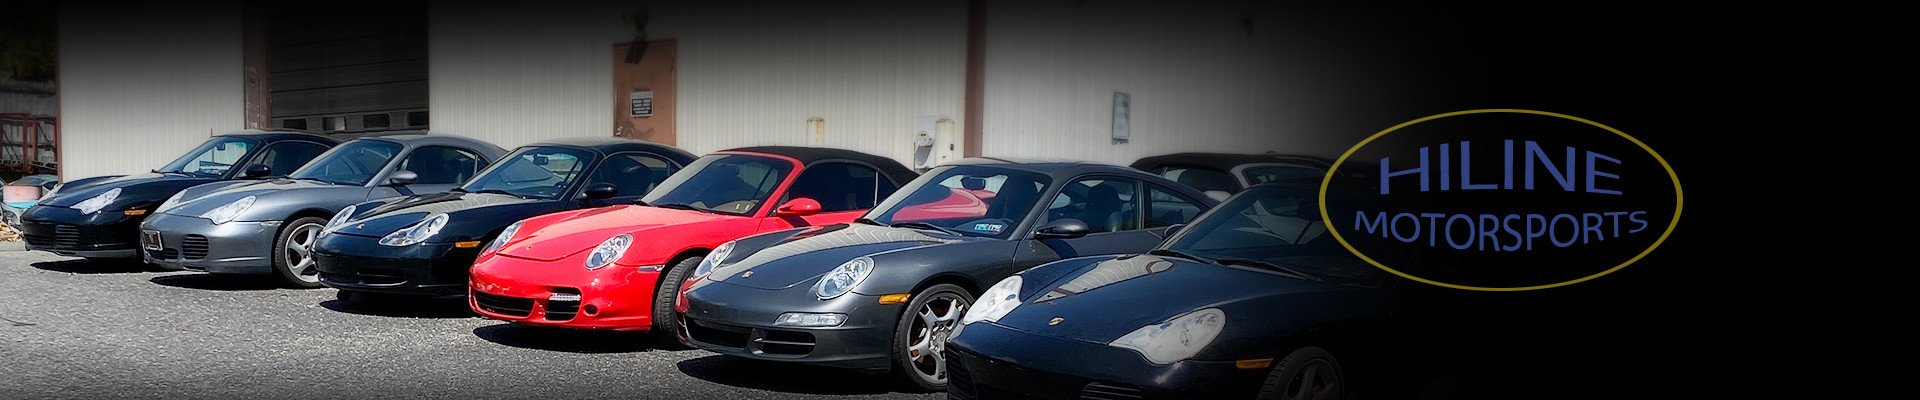 Porsche Repair in Sanatoga, PA by Hiline Motorsports a specialist Porsche repair shop in Pennsylvania specializing in Porsche repair, maintenance, performance tuning and service.